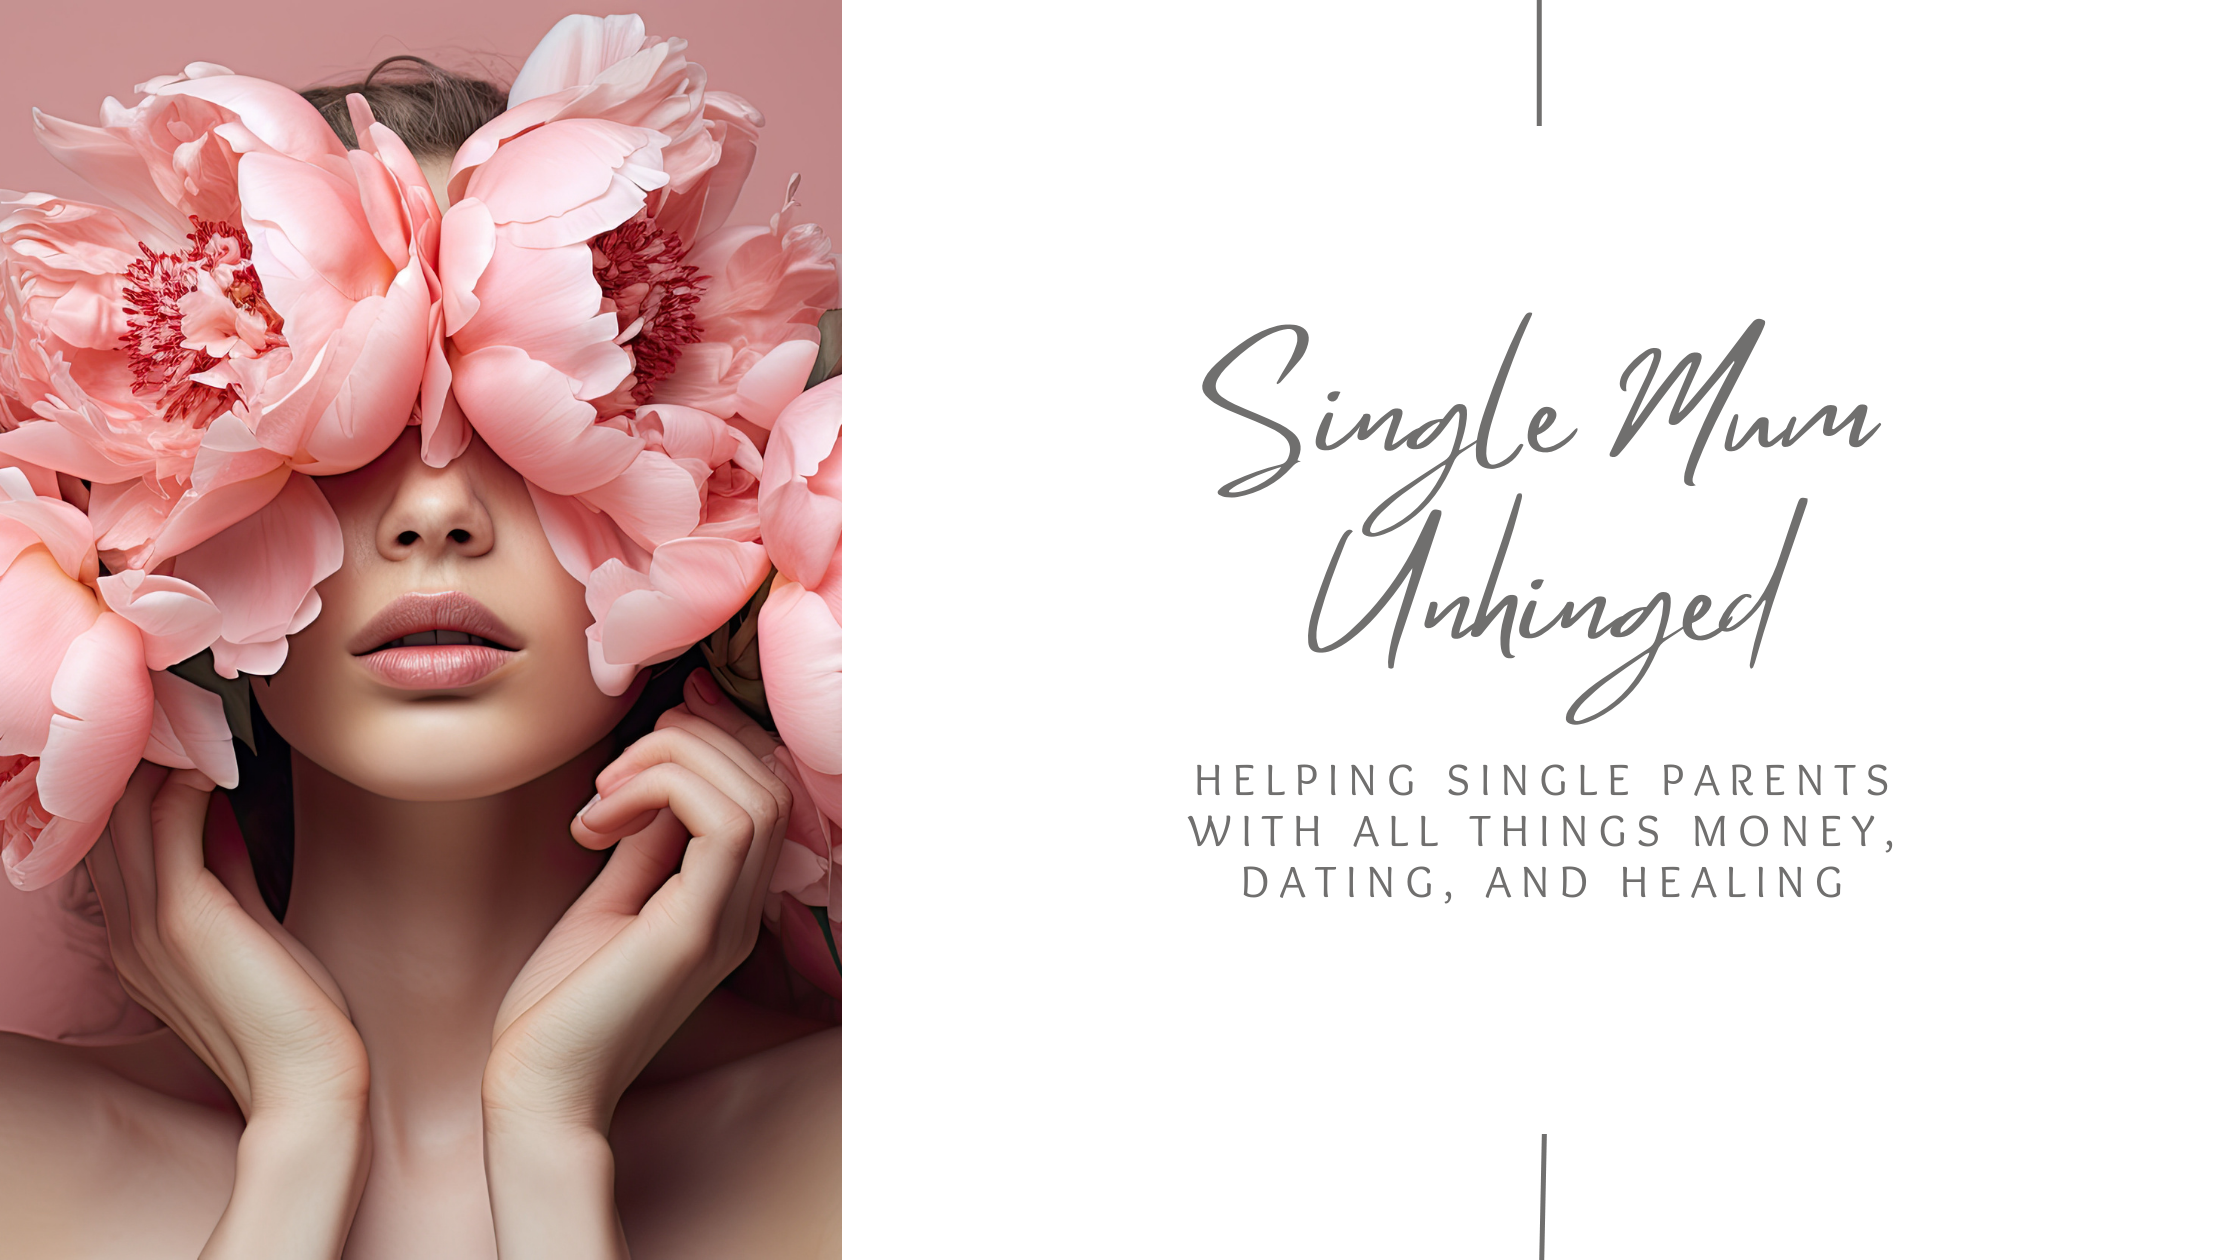 single mum unhinged title. helping single mums with all things money dating and healing. woman with pink flowers over her face